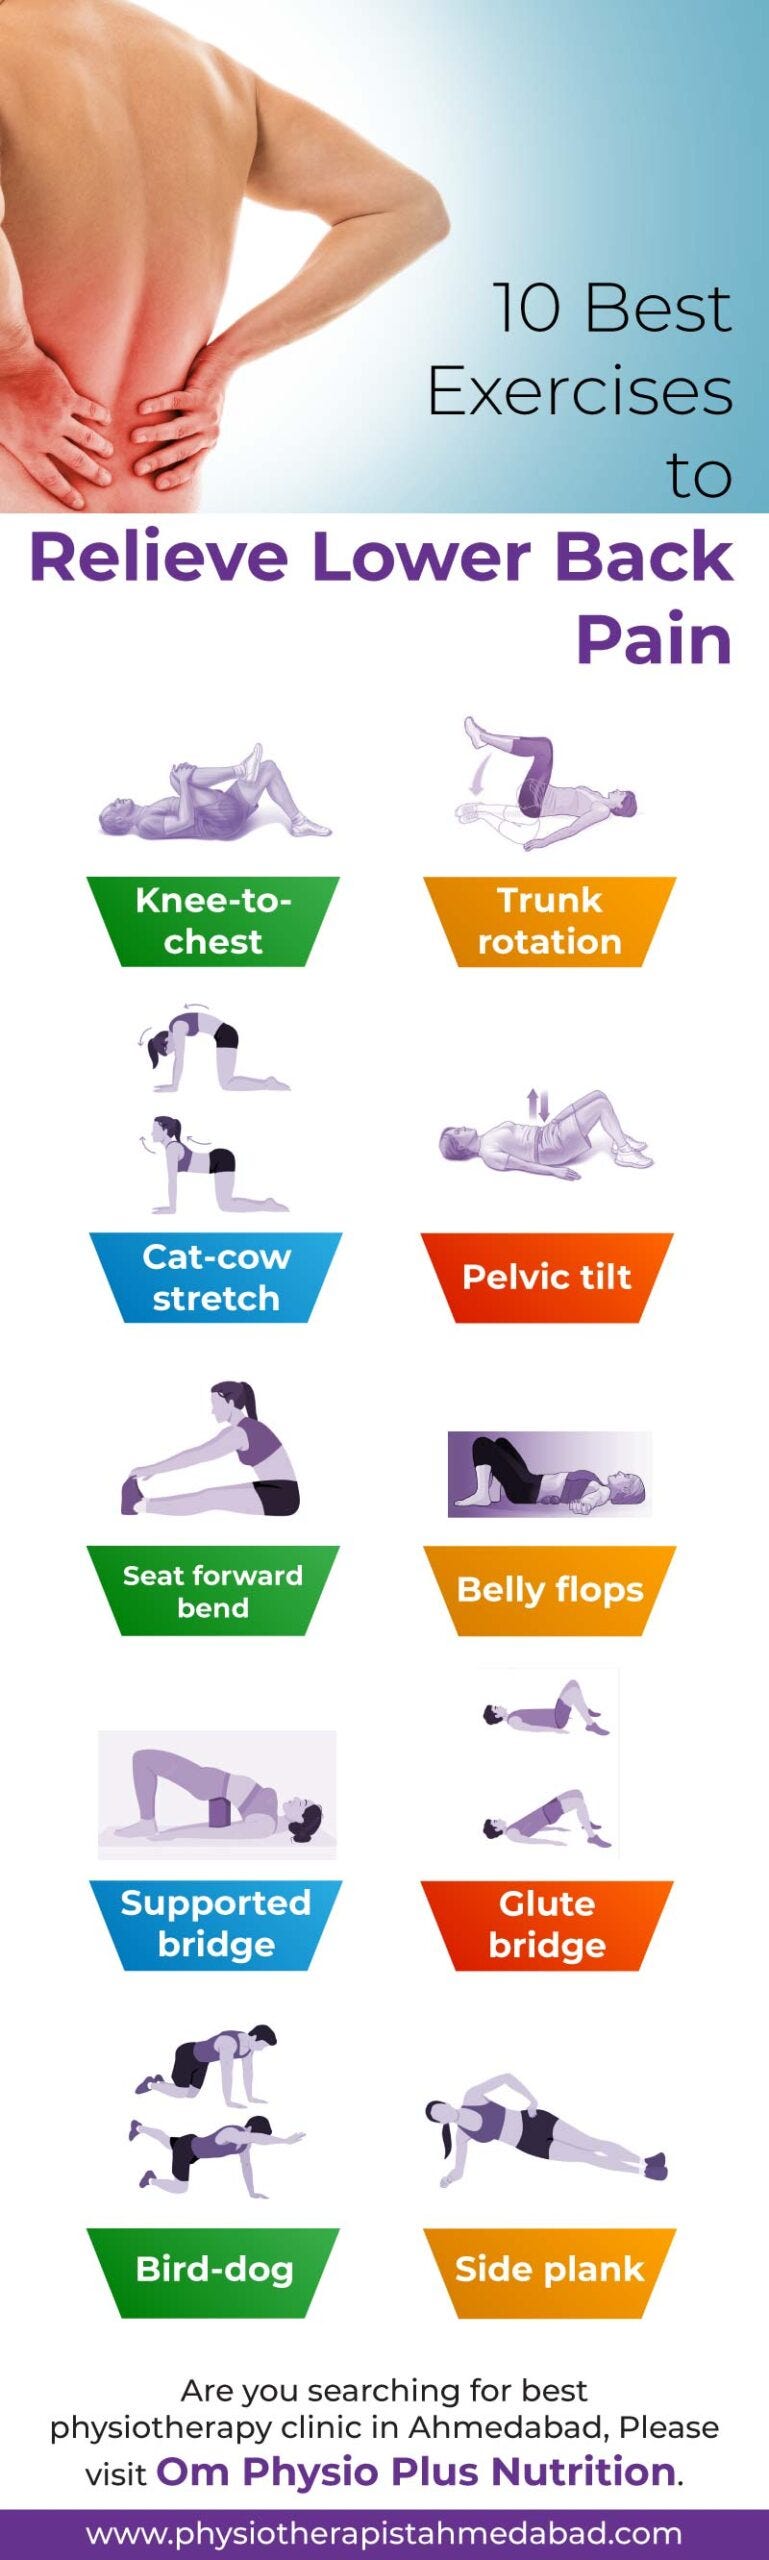 The Best Exercises and Stretches for Low Back Pain